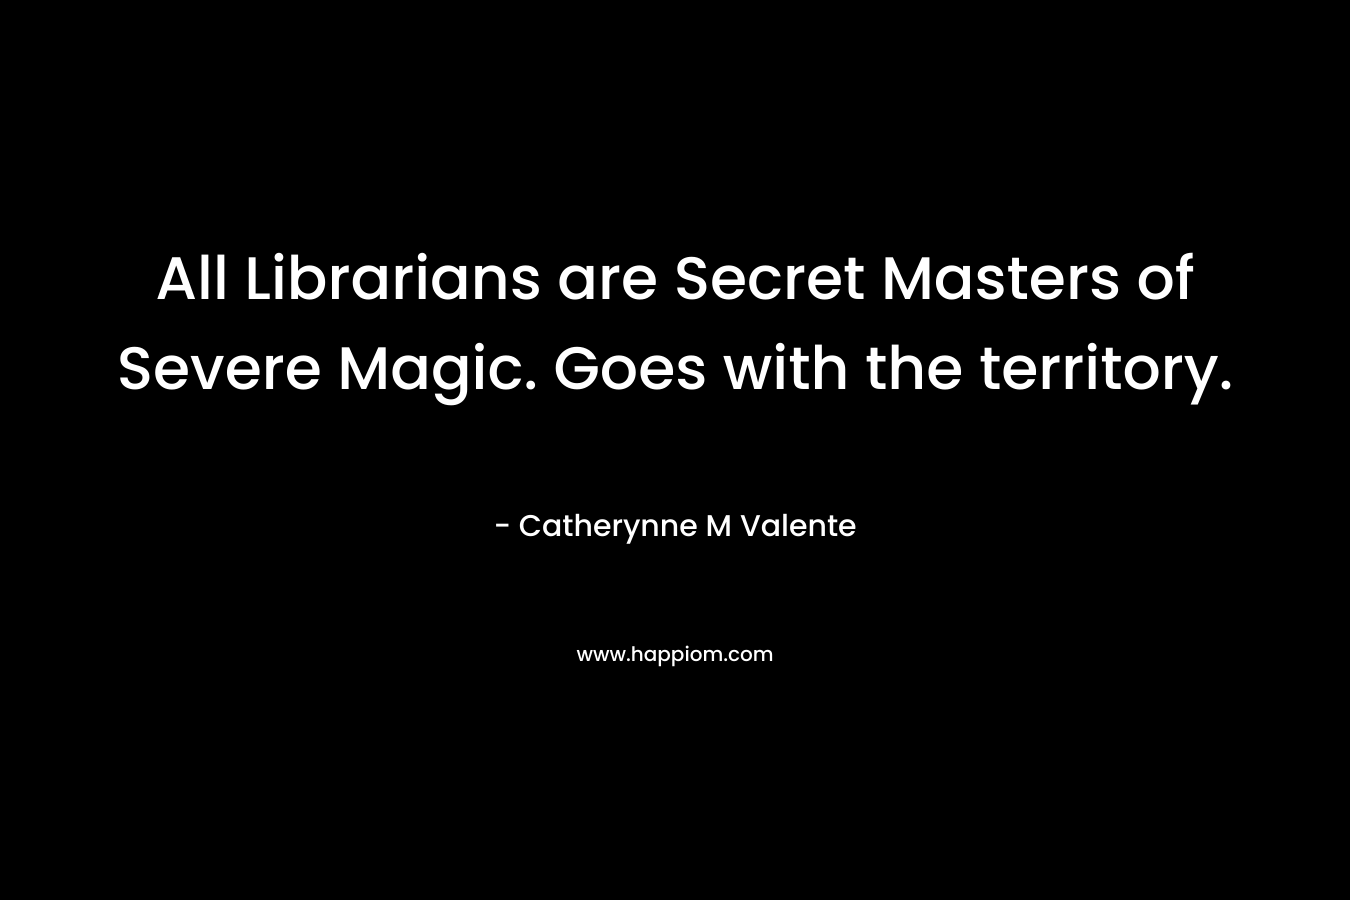 All Librarians are Secret Masters of Severe Magic. Goes with the territory. – Catherynne M Valente